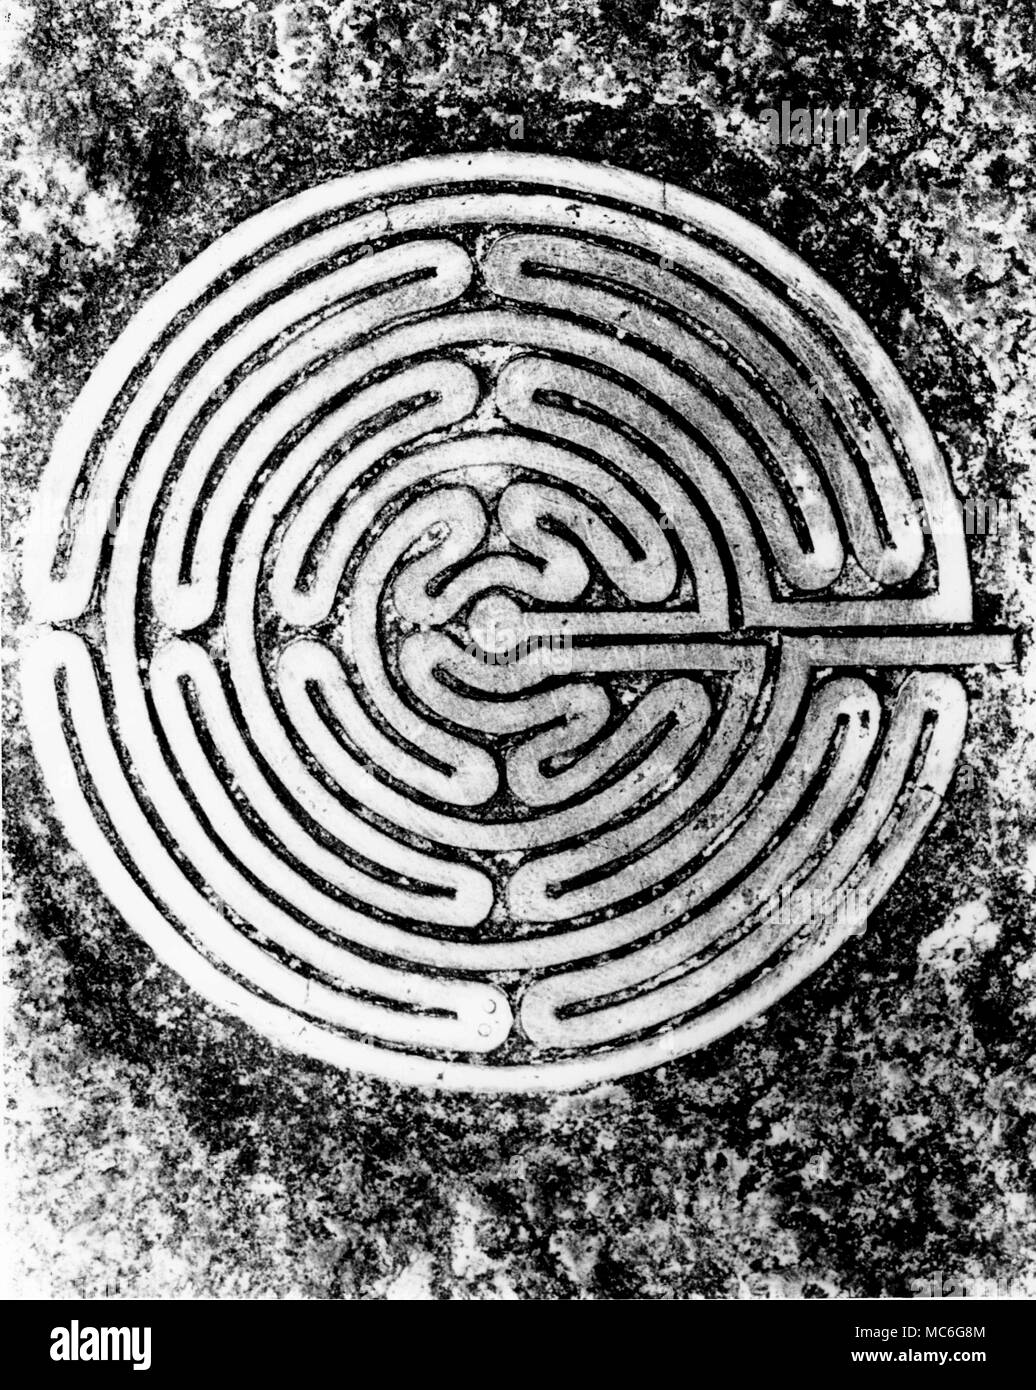 MAZES - THE ALKBOROUGH MAZE - JULIAN'S BOWER Photograph of a bronze copy of the mediaeval maze known as Julian's Bower, at Alkborough, on a gravestone in the local cemetery. The original turf maze is 12 metres in diameter [colour pictures of this maze are available in the Charles Walker archives). In addition to being used for this grave-stone, the ground plan has been adopted for details in the masonry and stained glass of the local parish church (colour images of all these are in the Charles Walker archives). The Alkborough maze is not a pure maze, or labyrinth, for once having embarked u Stock Photo